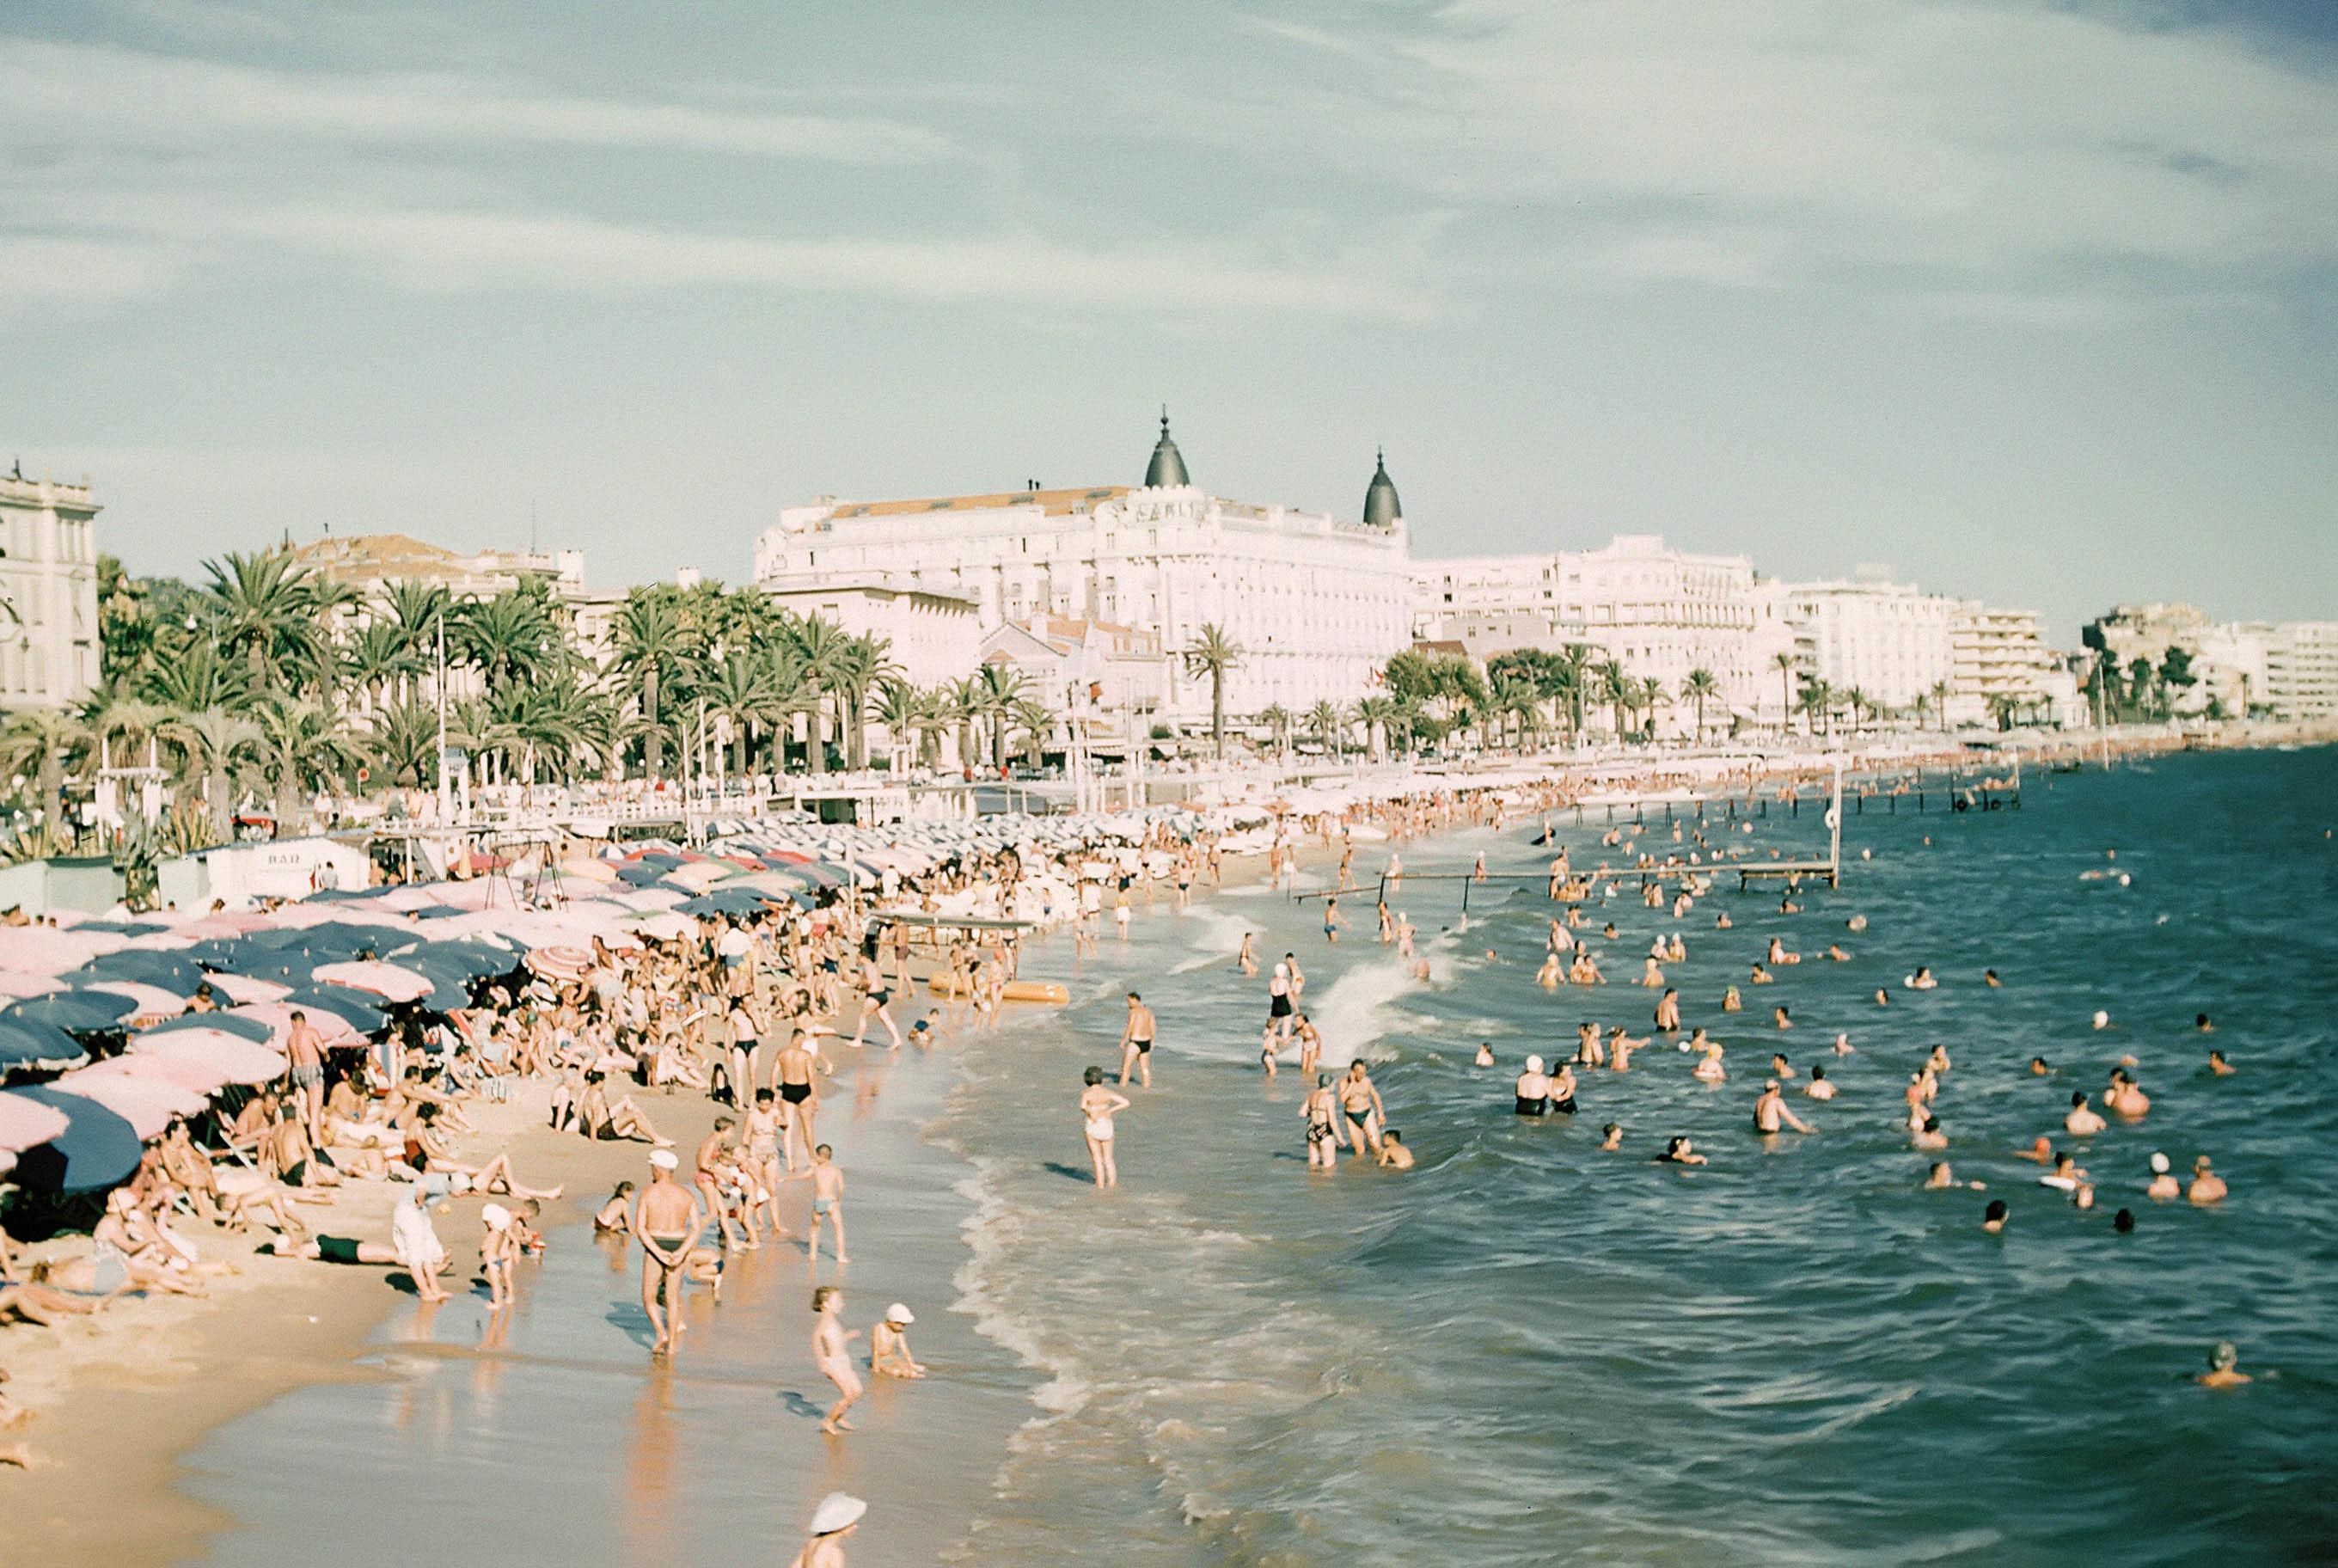 1960s vintage French Riviera beach photograph.